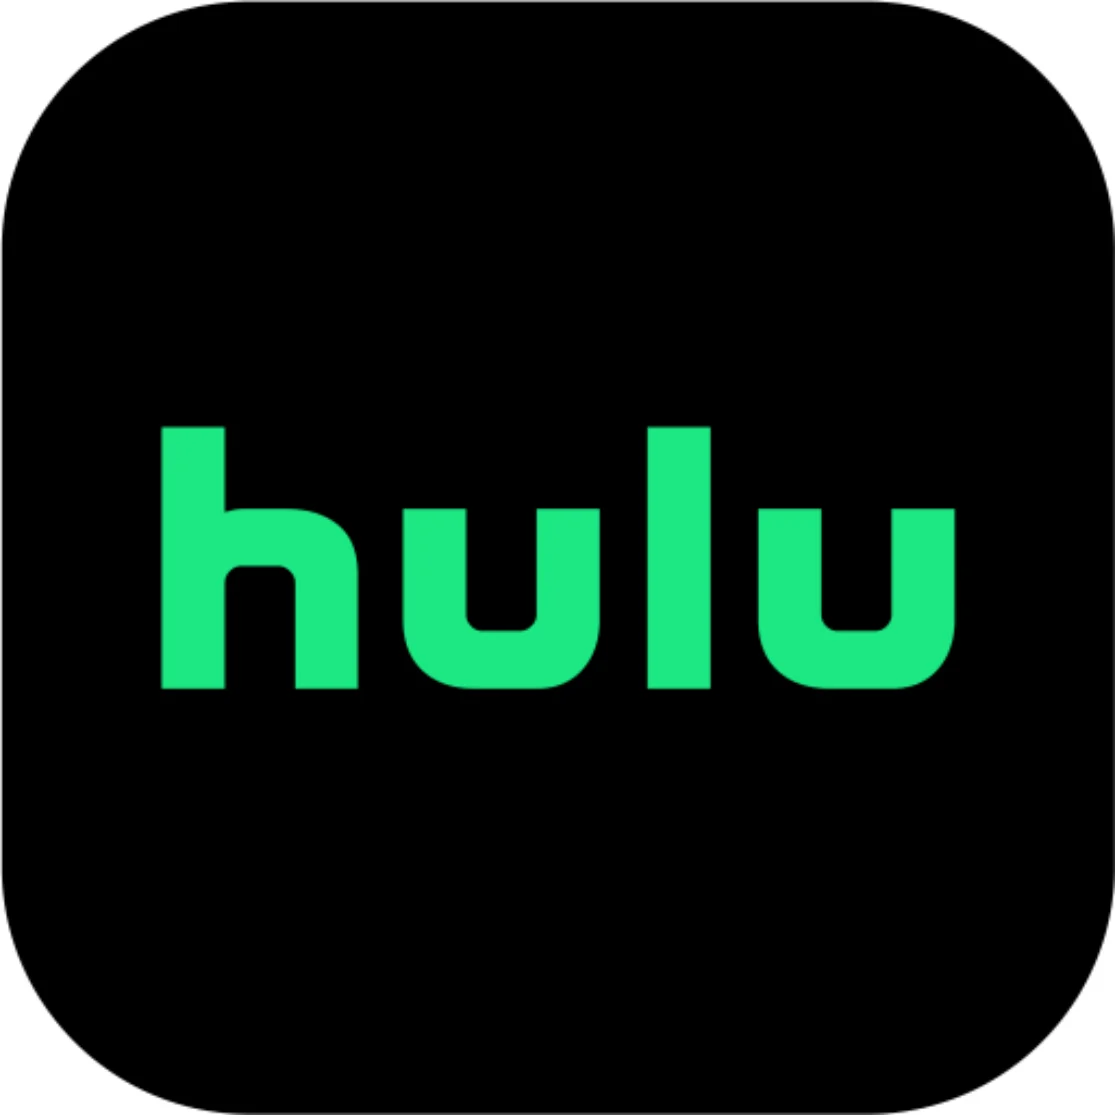 Up To 50% Off Plans - Weekend Sale At Hulu